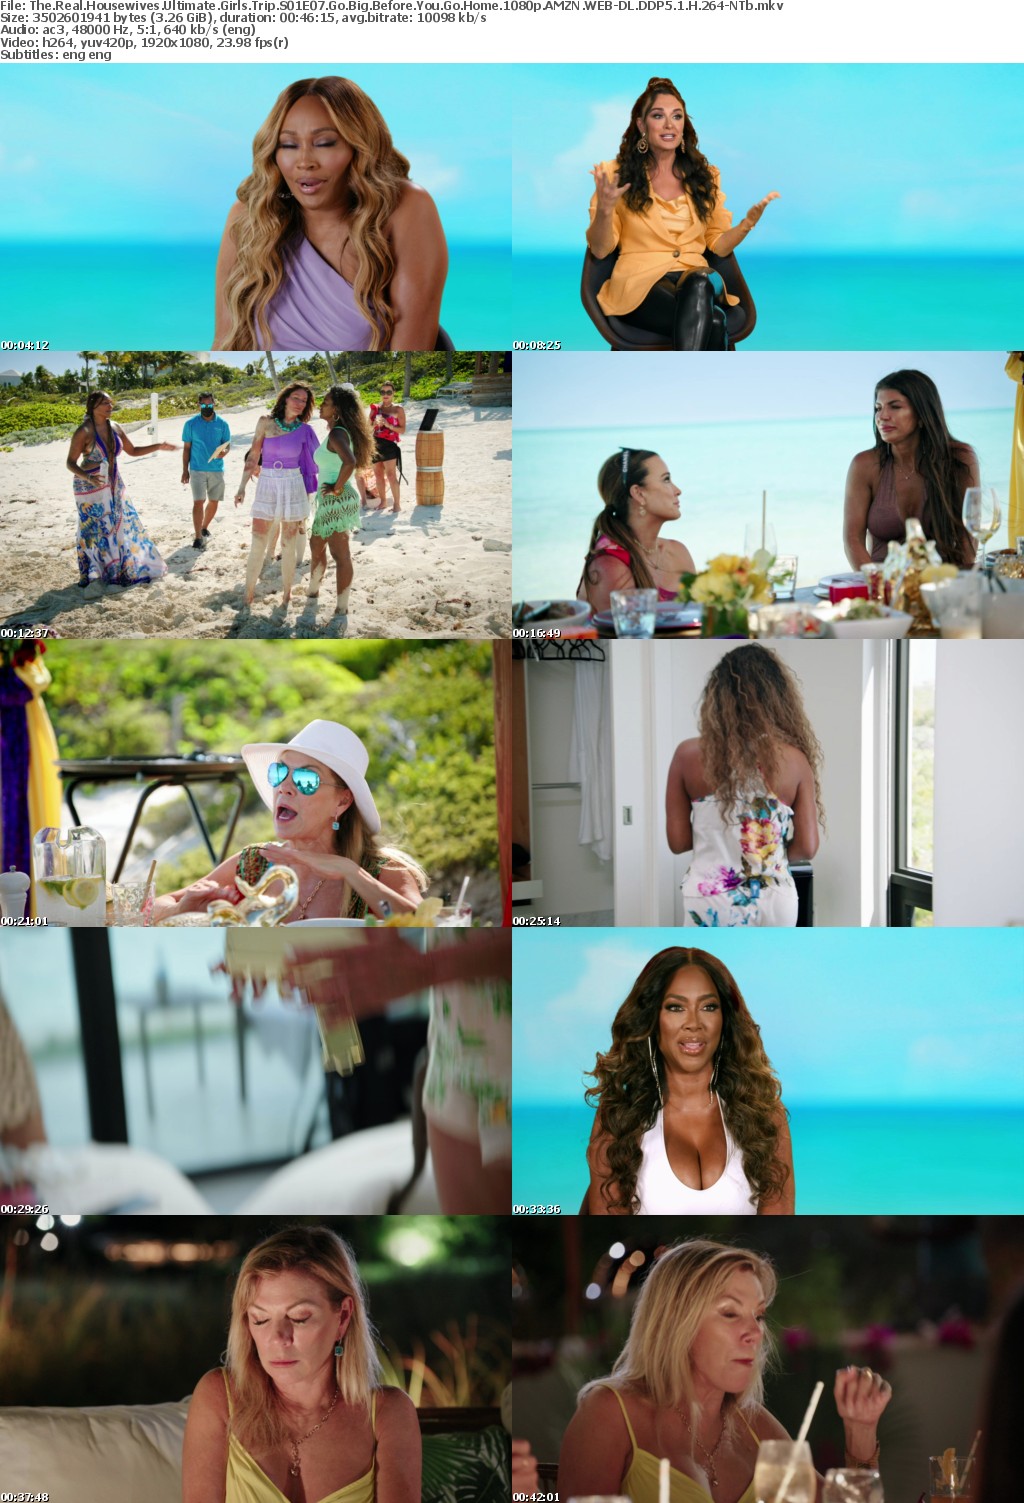 The Real Housewives Ultimate Girls Trip S01E07 Go Big Before You Go Home 1080p AMZN WEB-DL DDP5 1 H 264-NTb